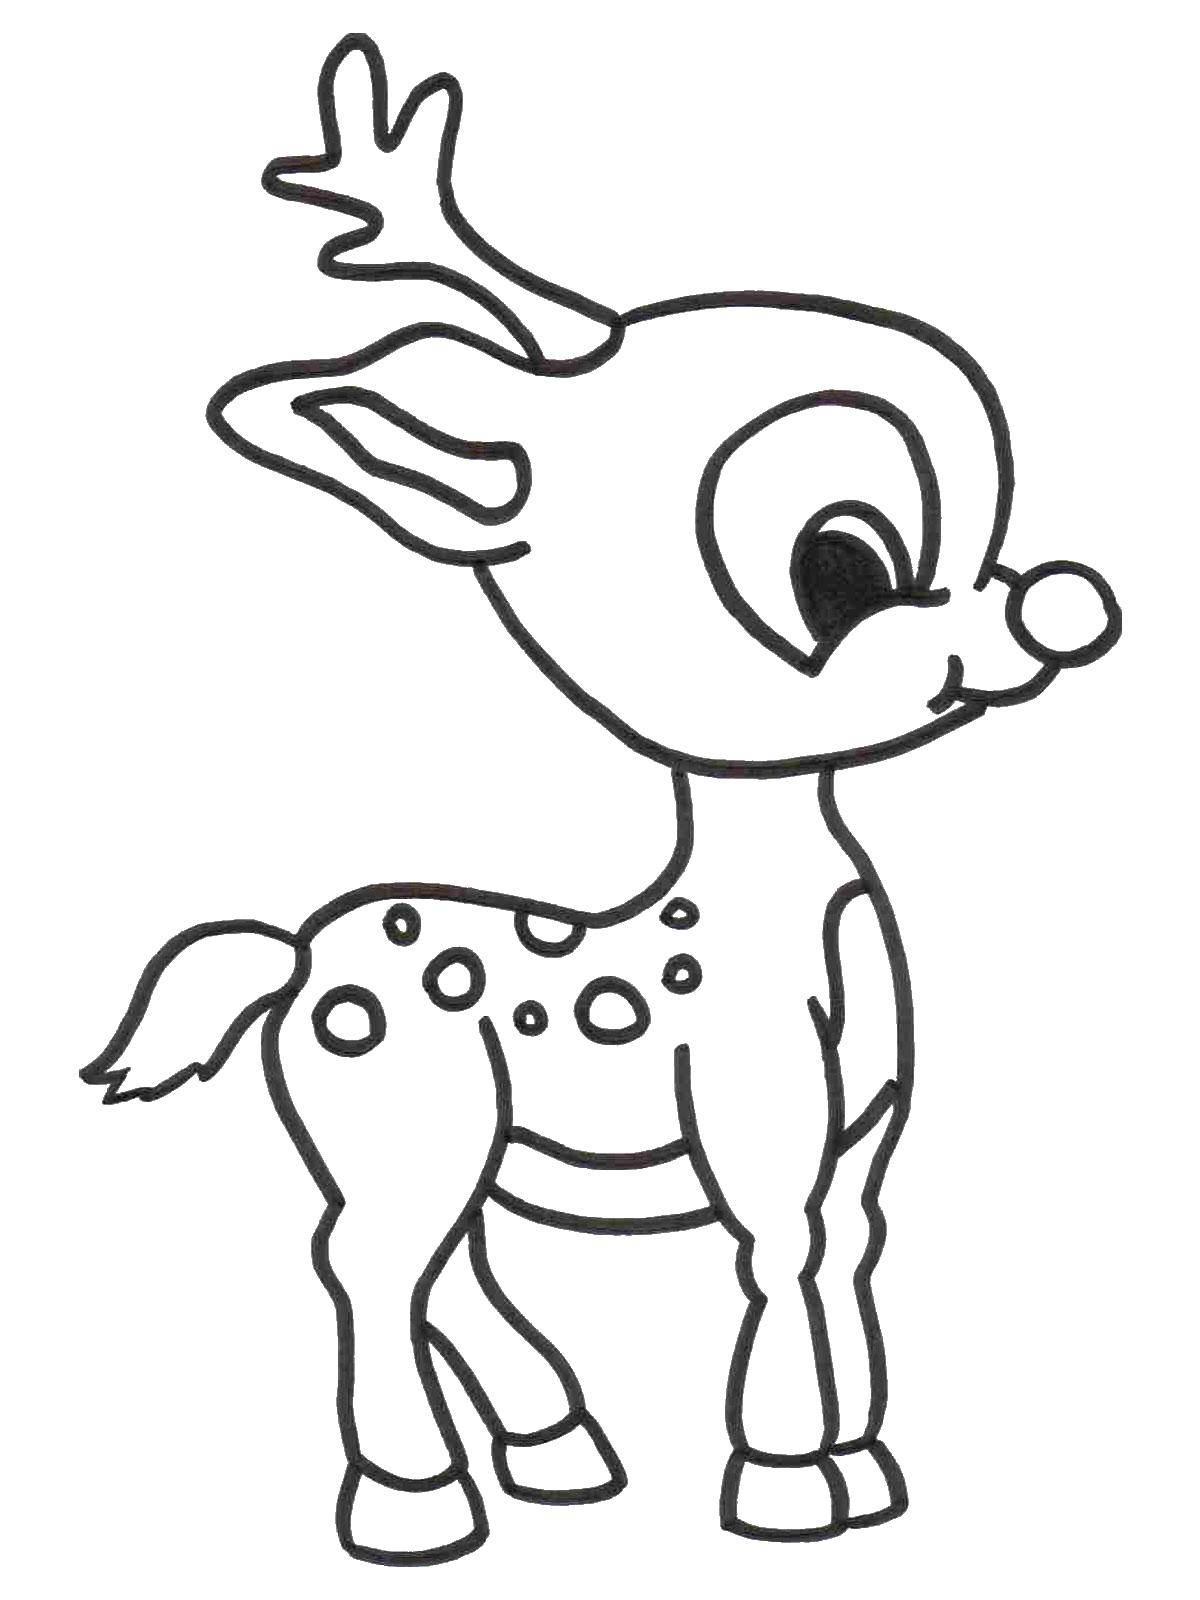 Coloring Fawn. Category animals. Tags:  animals, baby deer, Bambi.